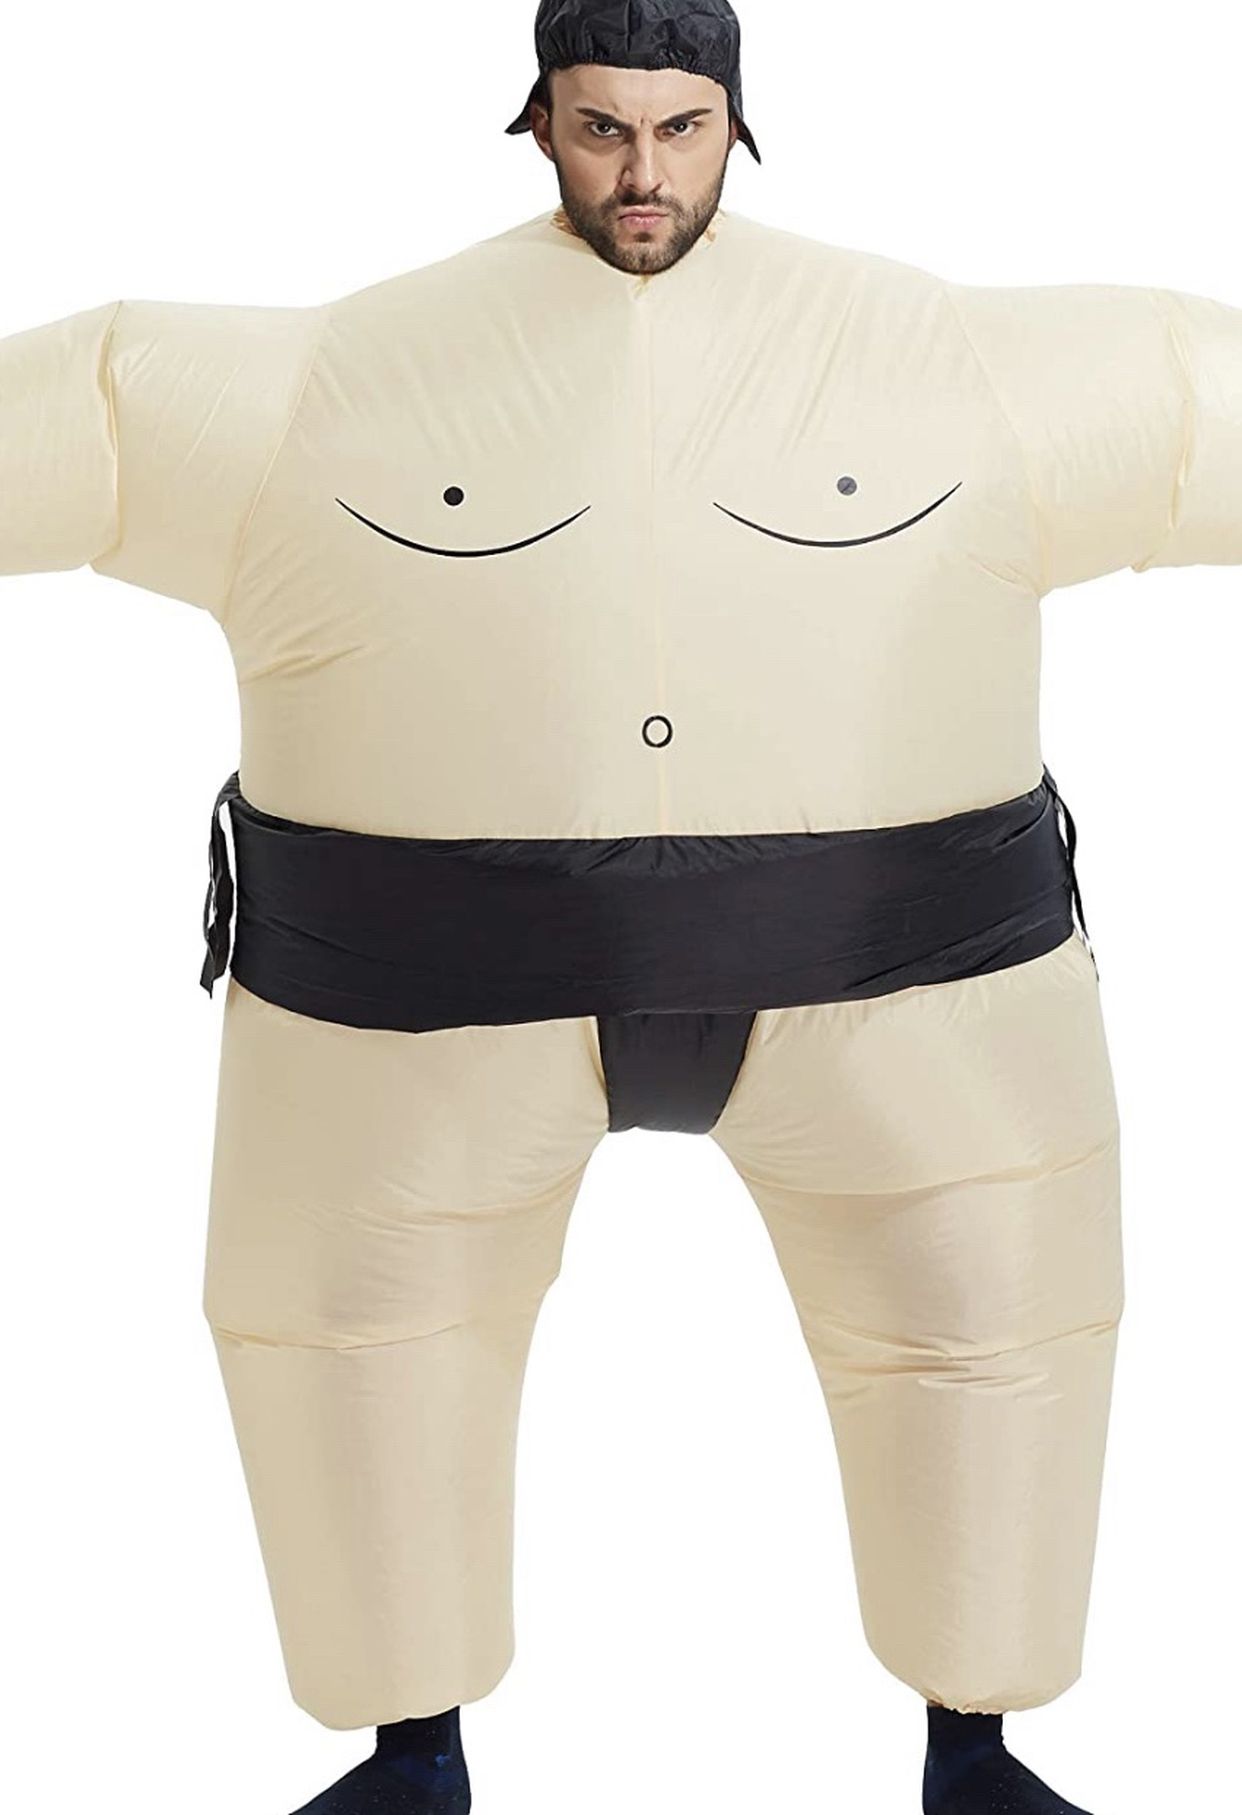 New Inflatable Adult Sumo Costume One Size Fits All